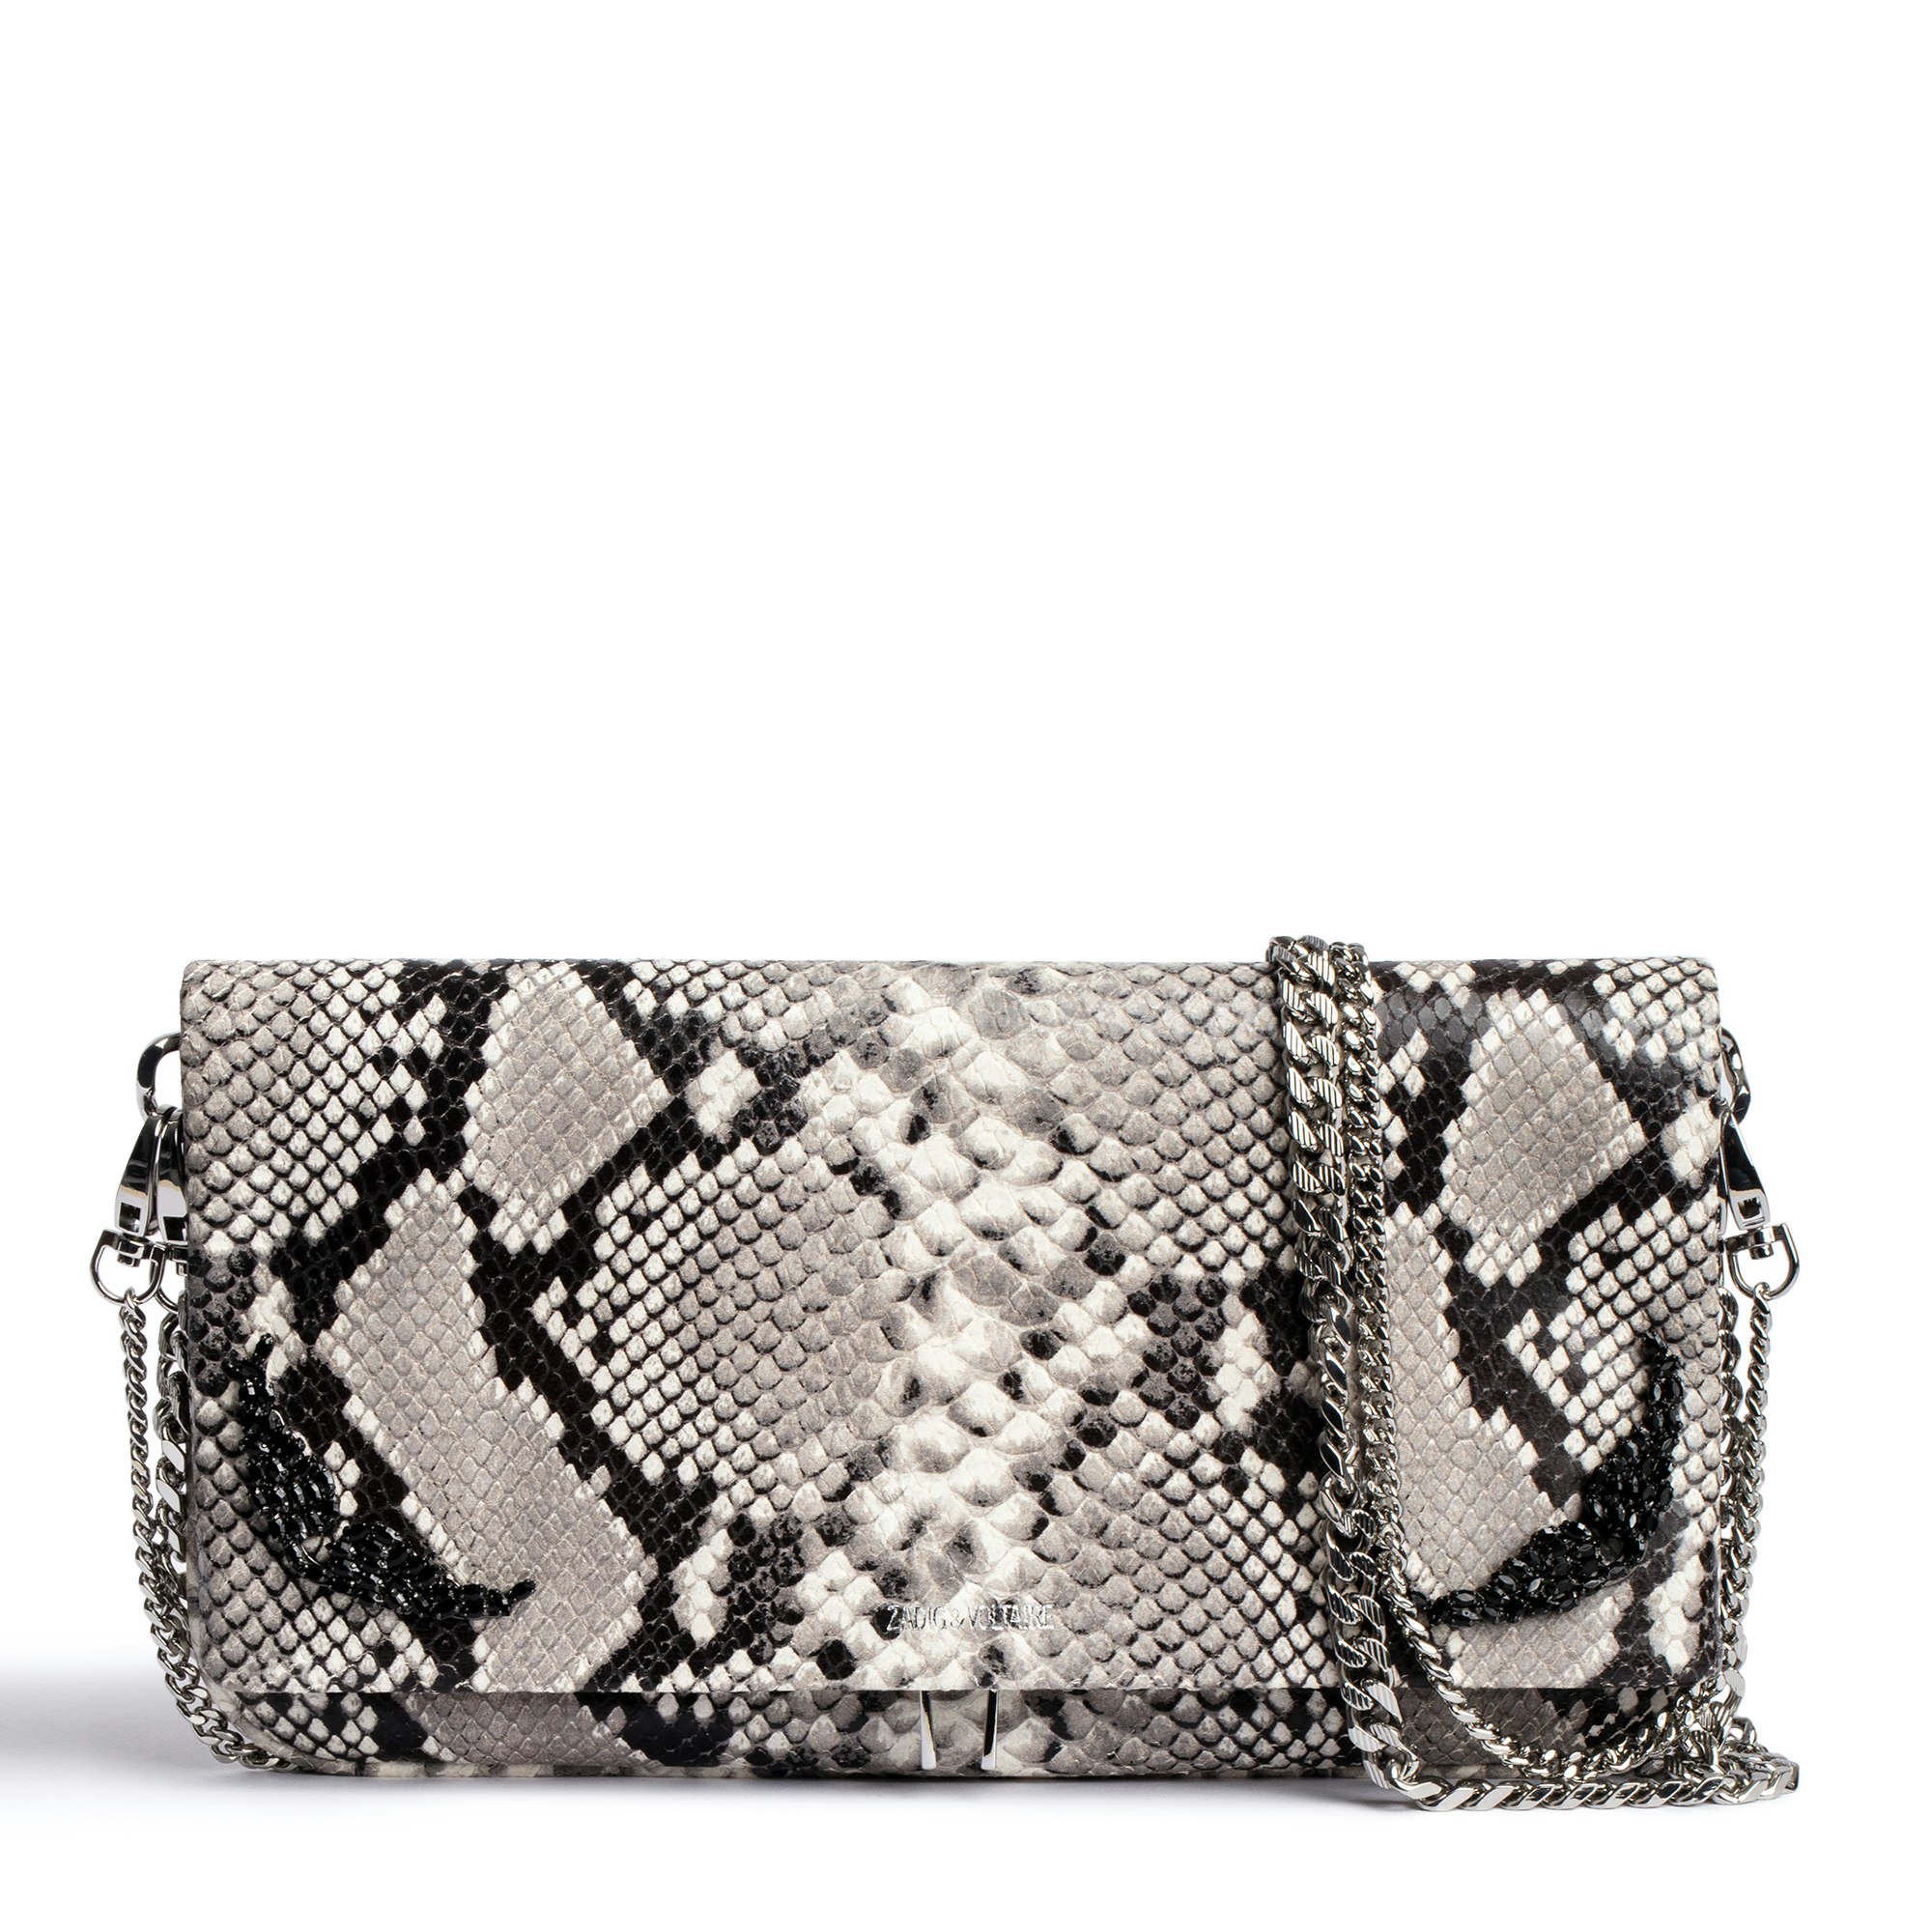 Rock Mirror Clutch Women's beige leather clutch bag with studs and snakeskin effect